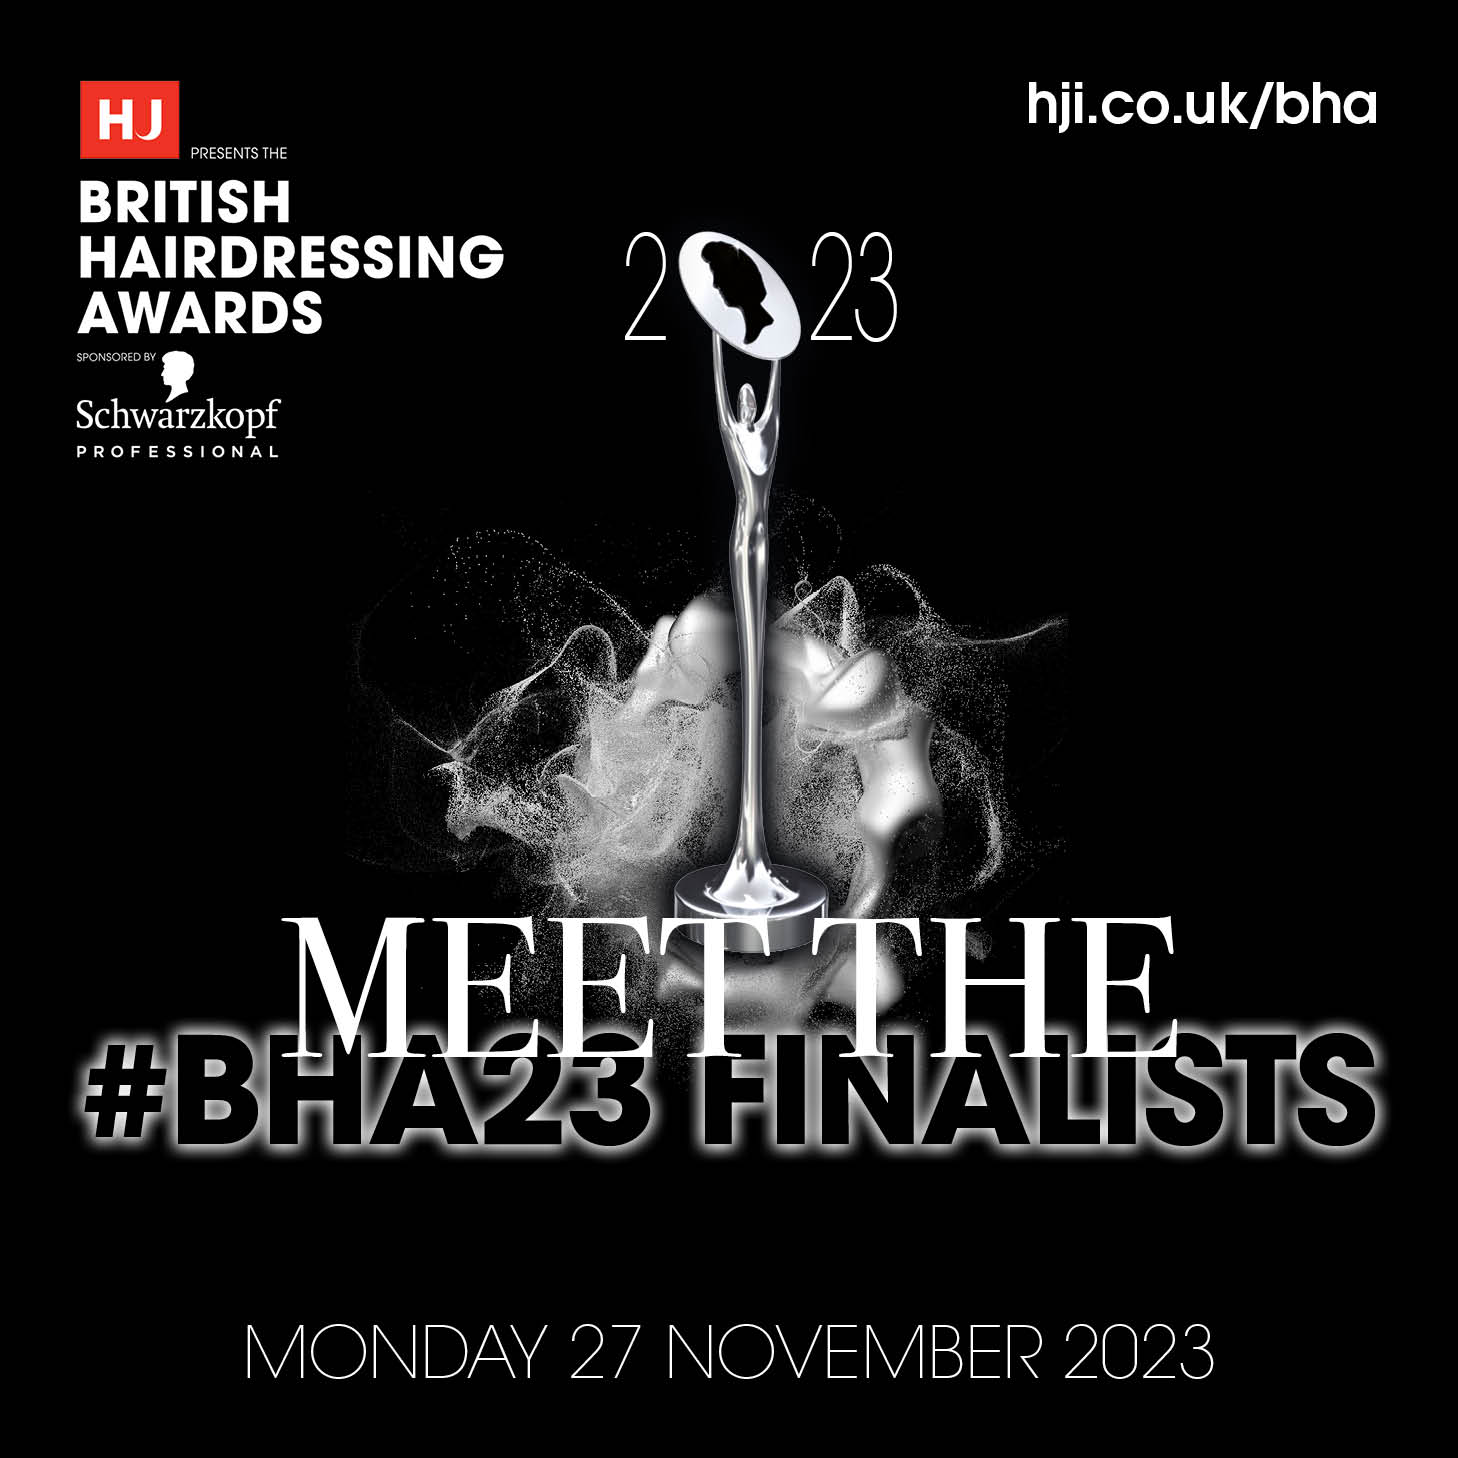 We’re North Eastern Hairdresser of the Year FINALISTS!